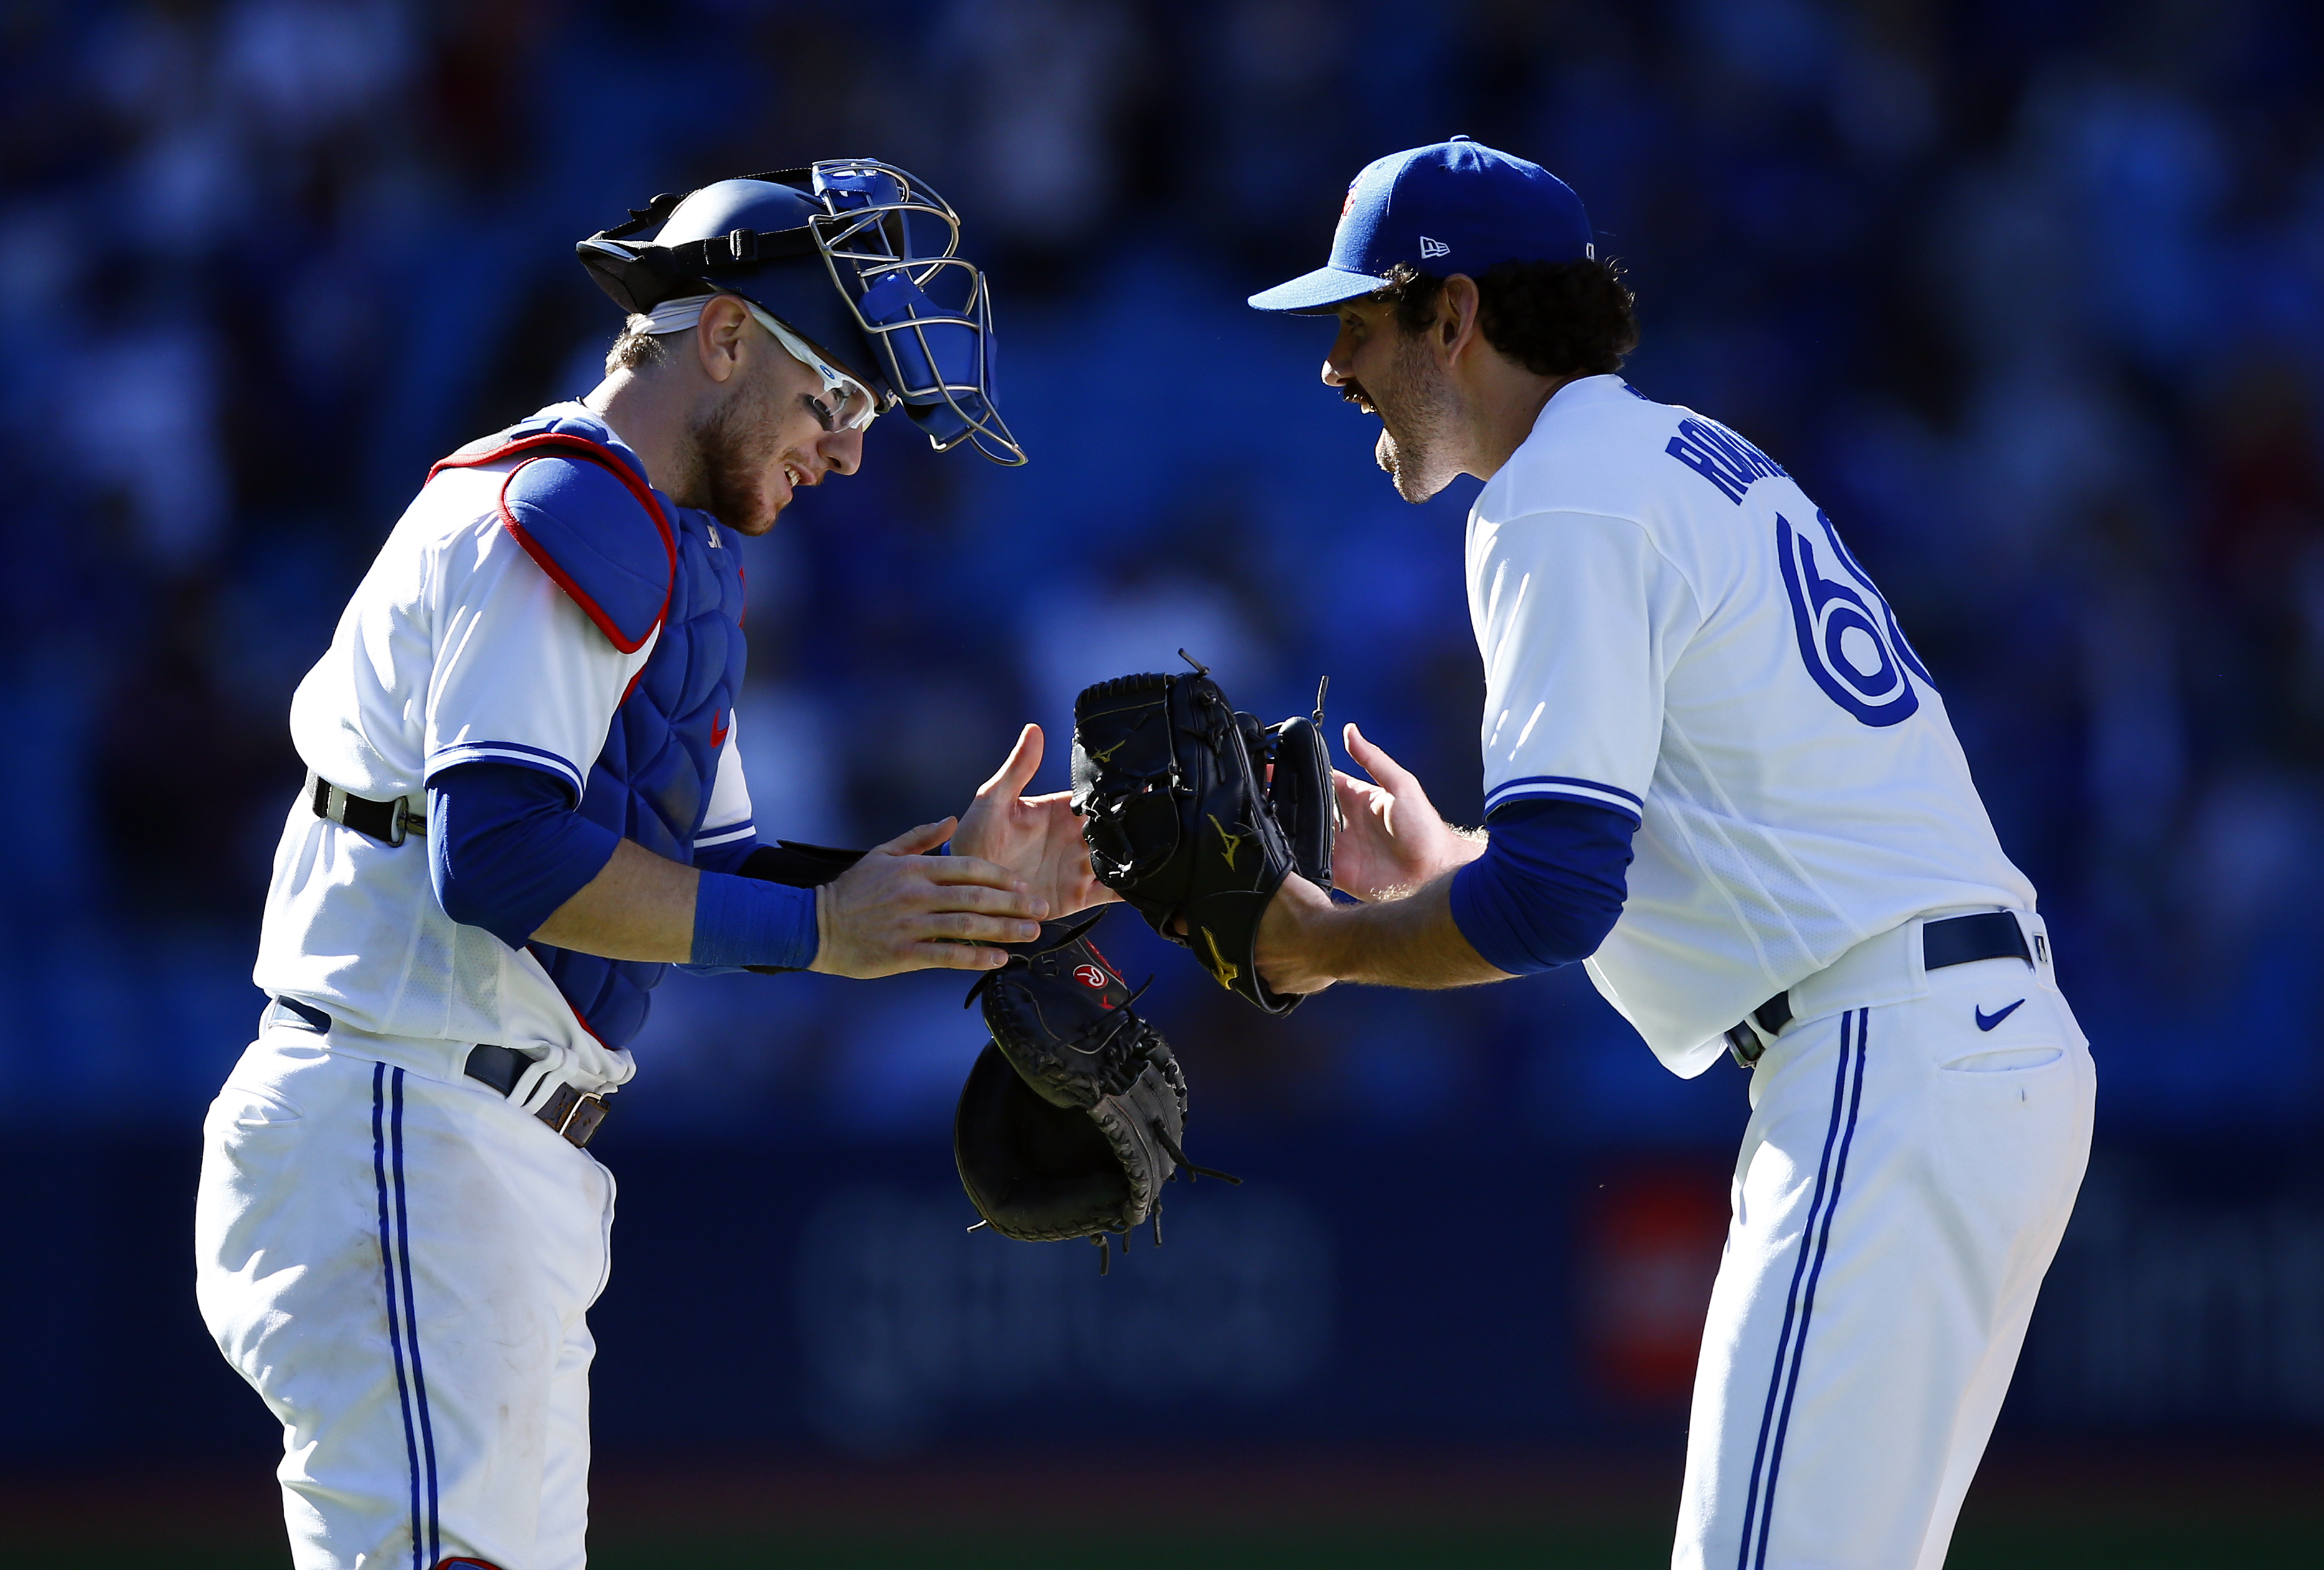 Red Sox host the Blue Jays, try to extend home win streak